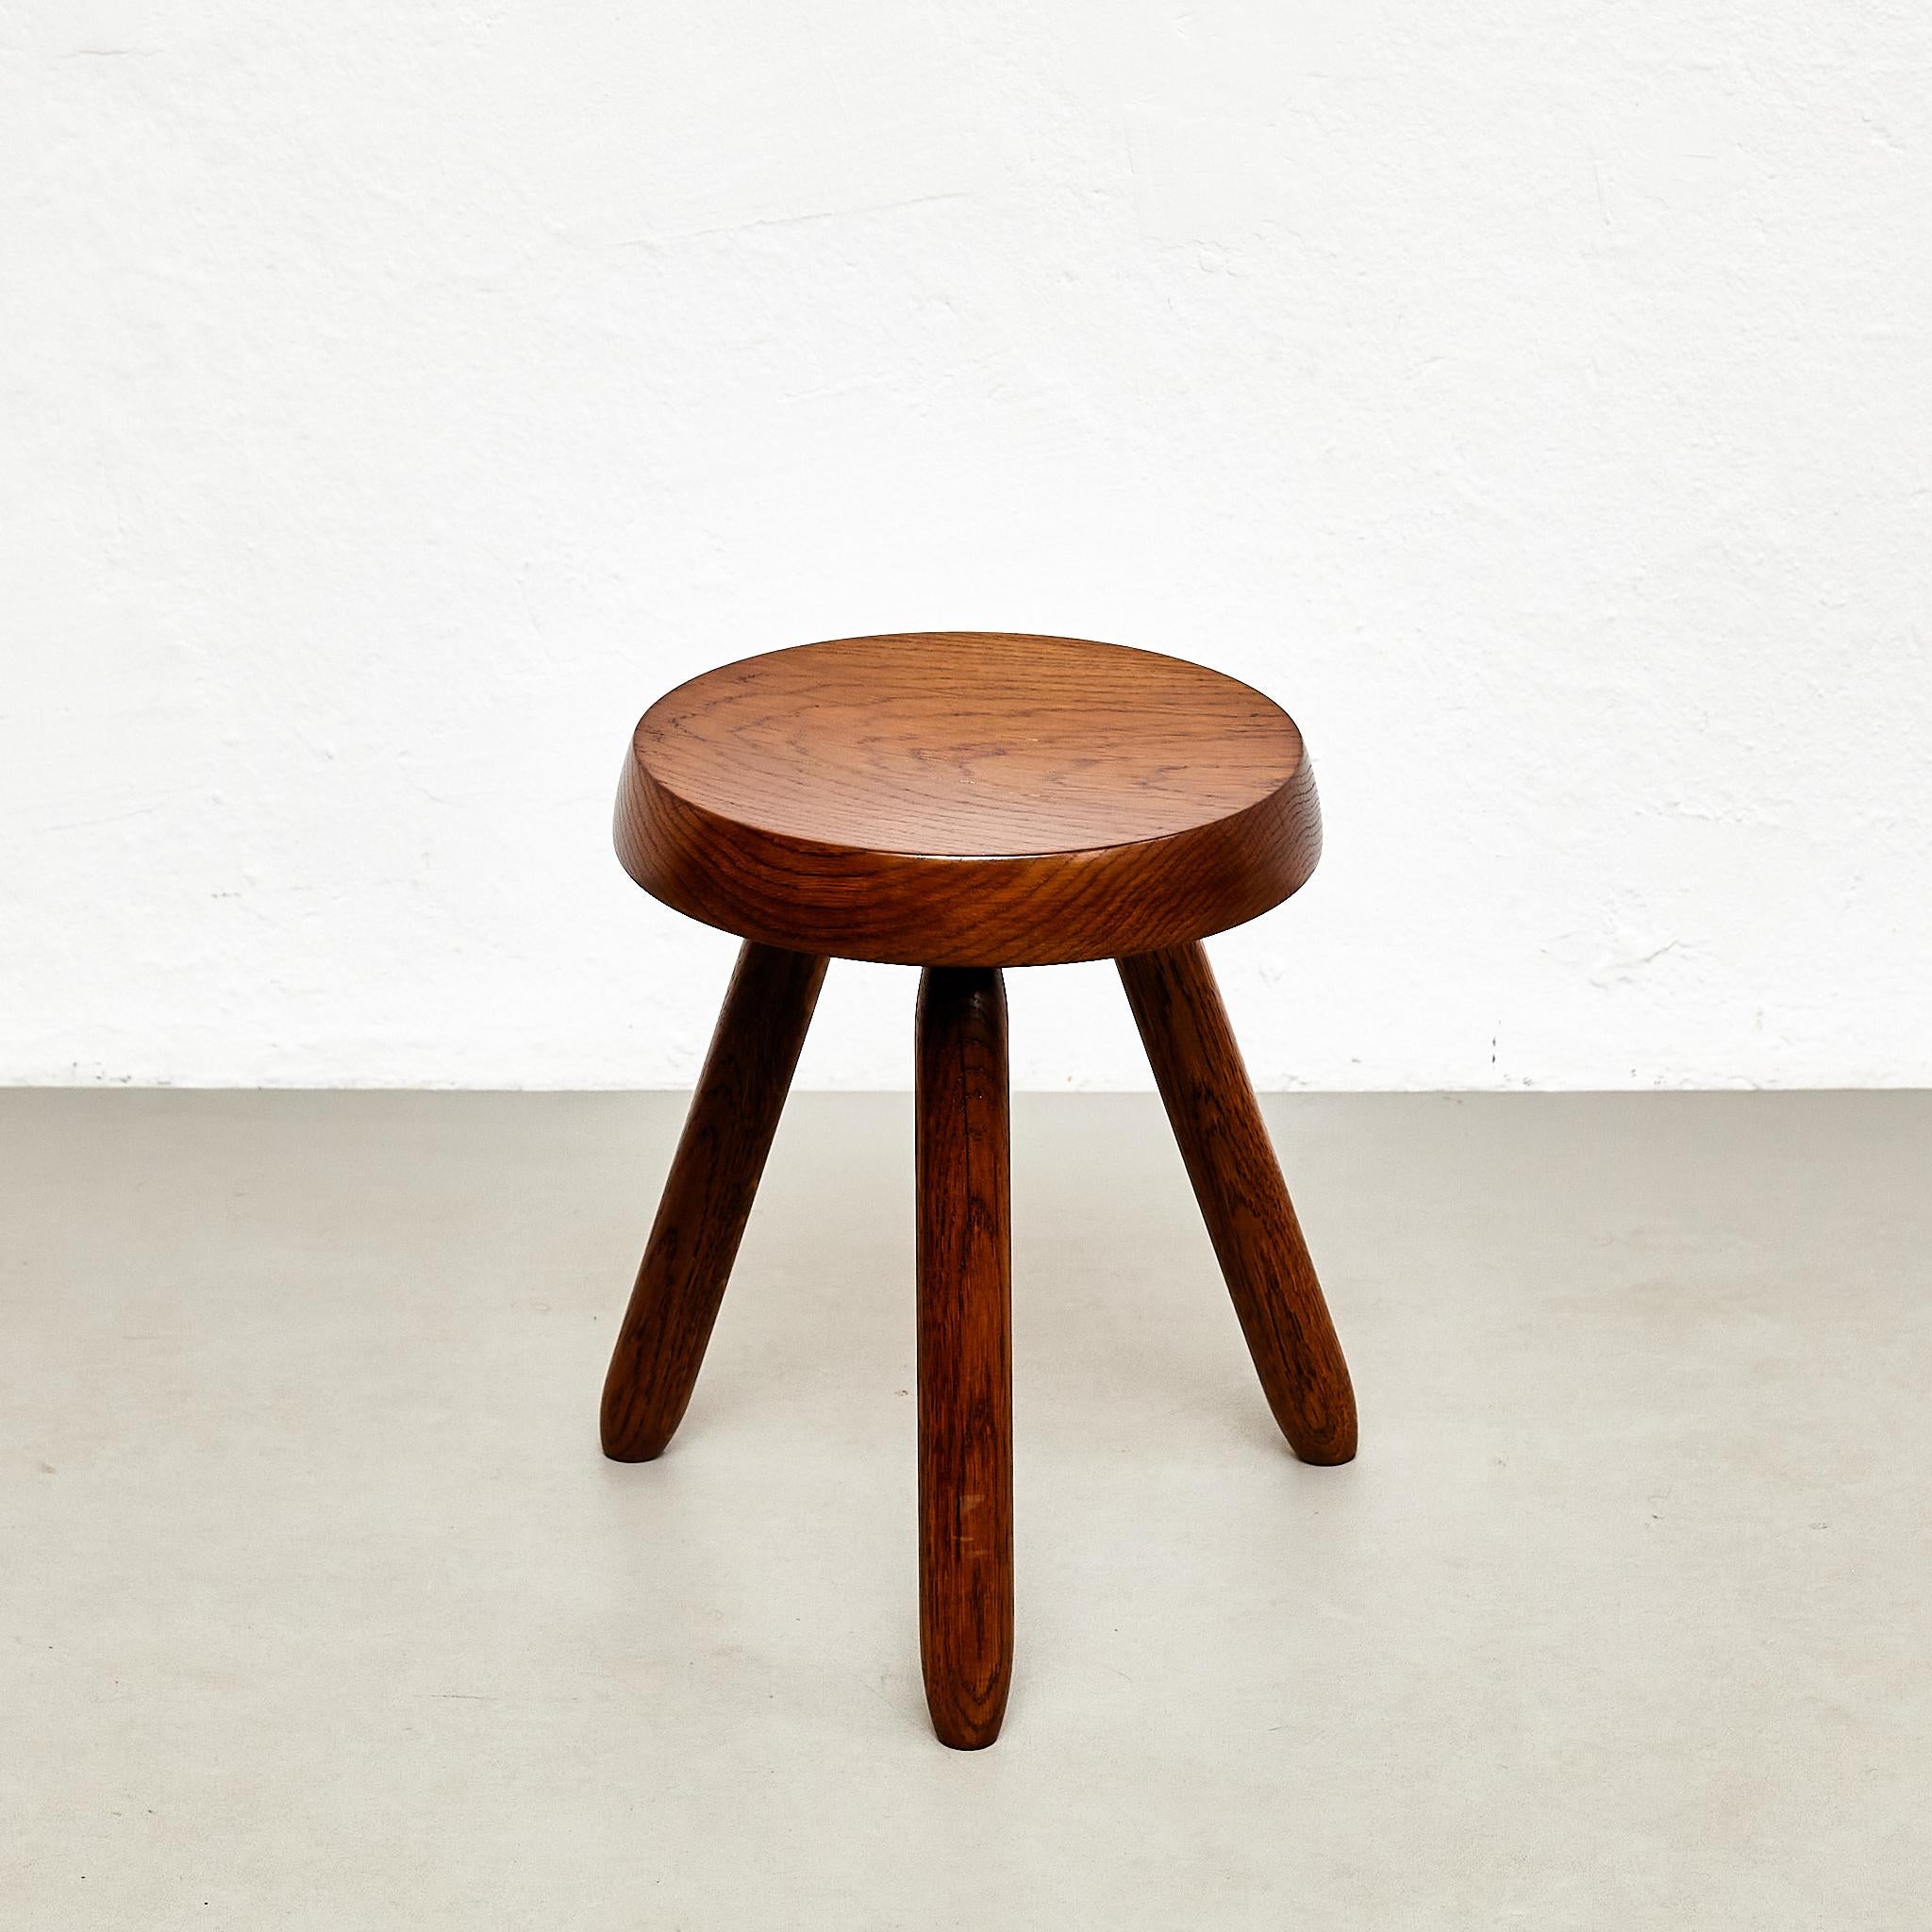 French Mid-Century Modern Wood Tripod Stool in the Style of Charlotte Perriand For Sale